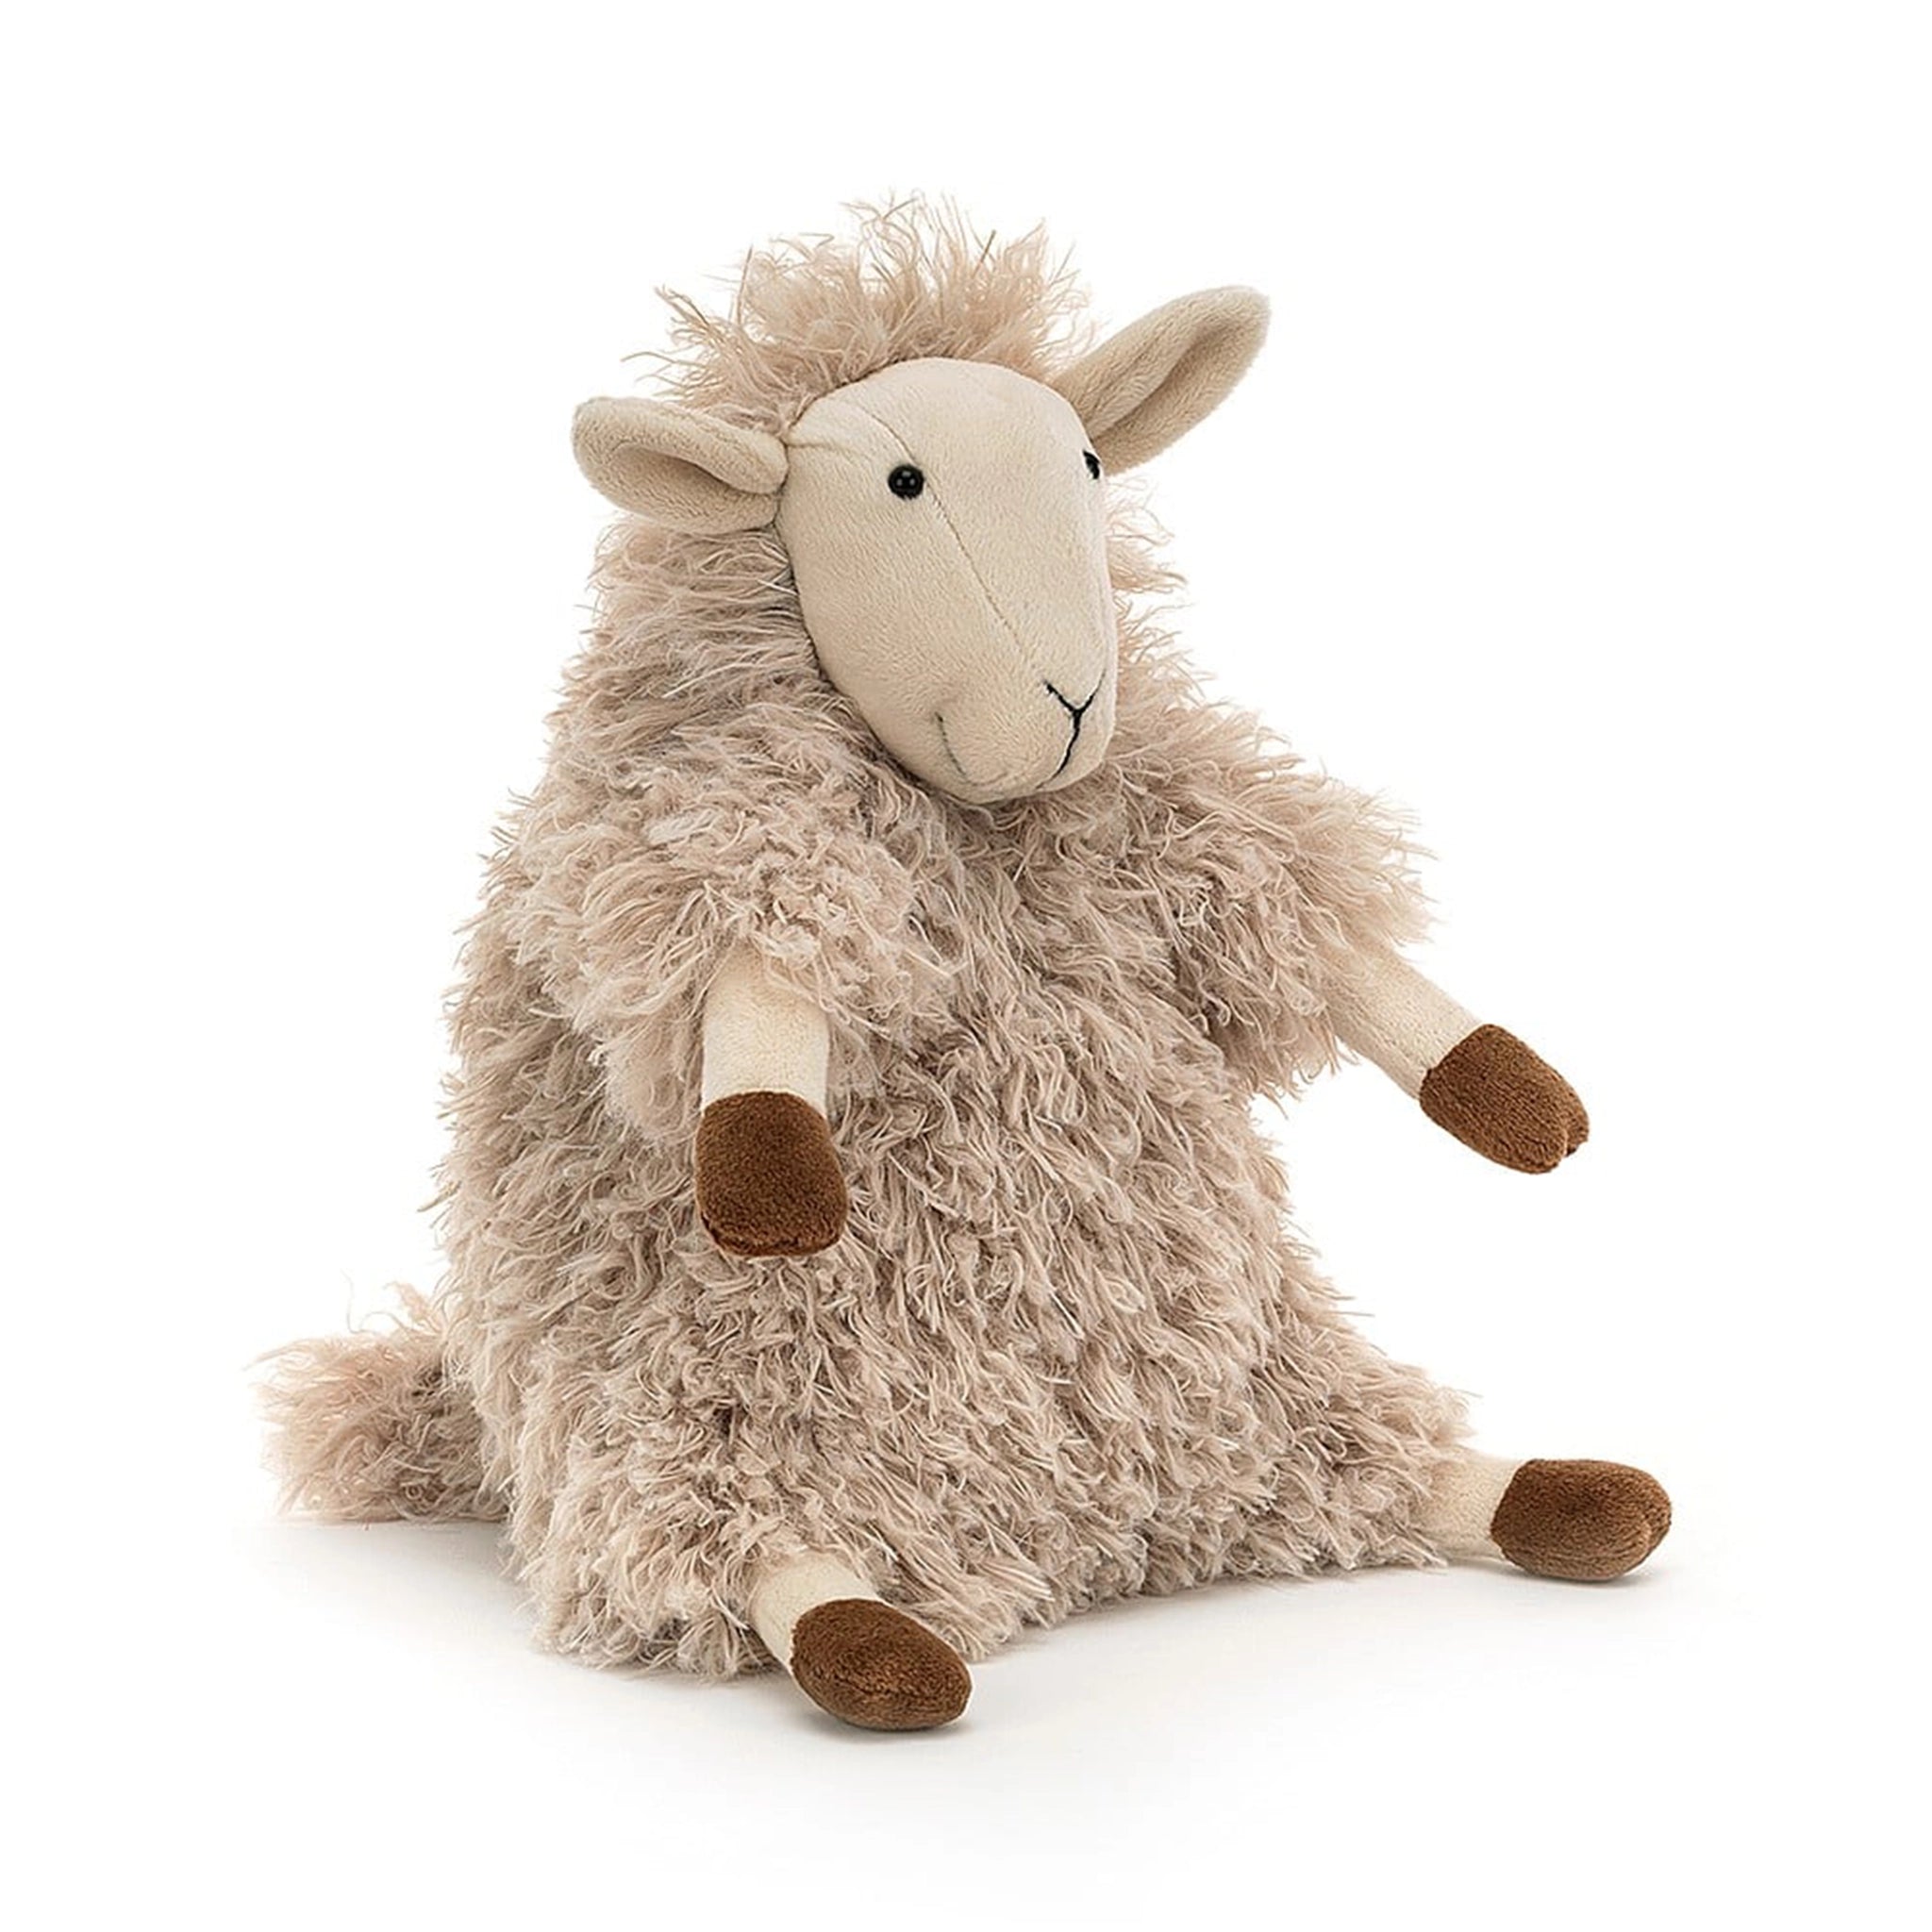 On a white background is a neutral tan stuffed animal sheep with fluffy fur. 